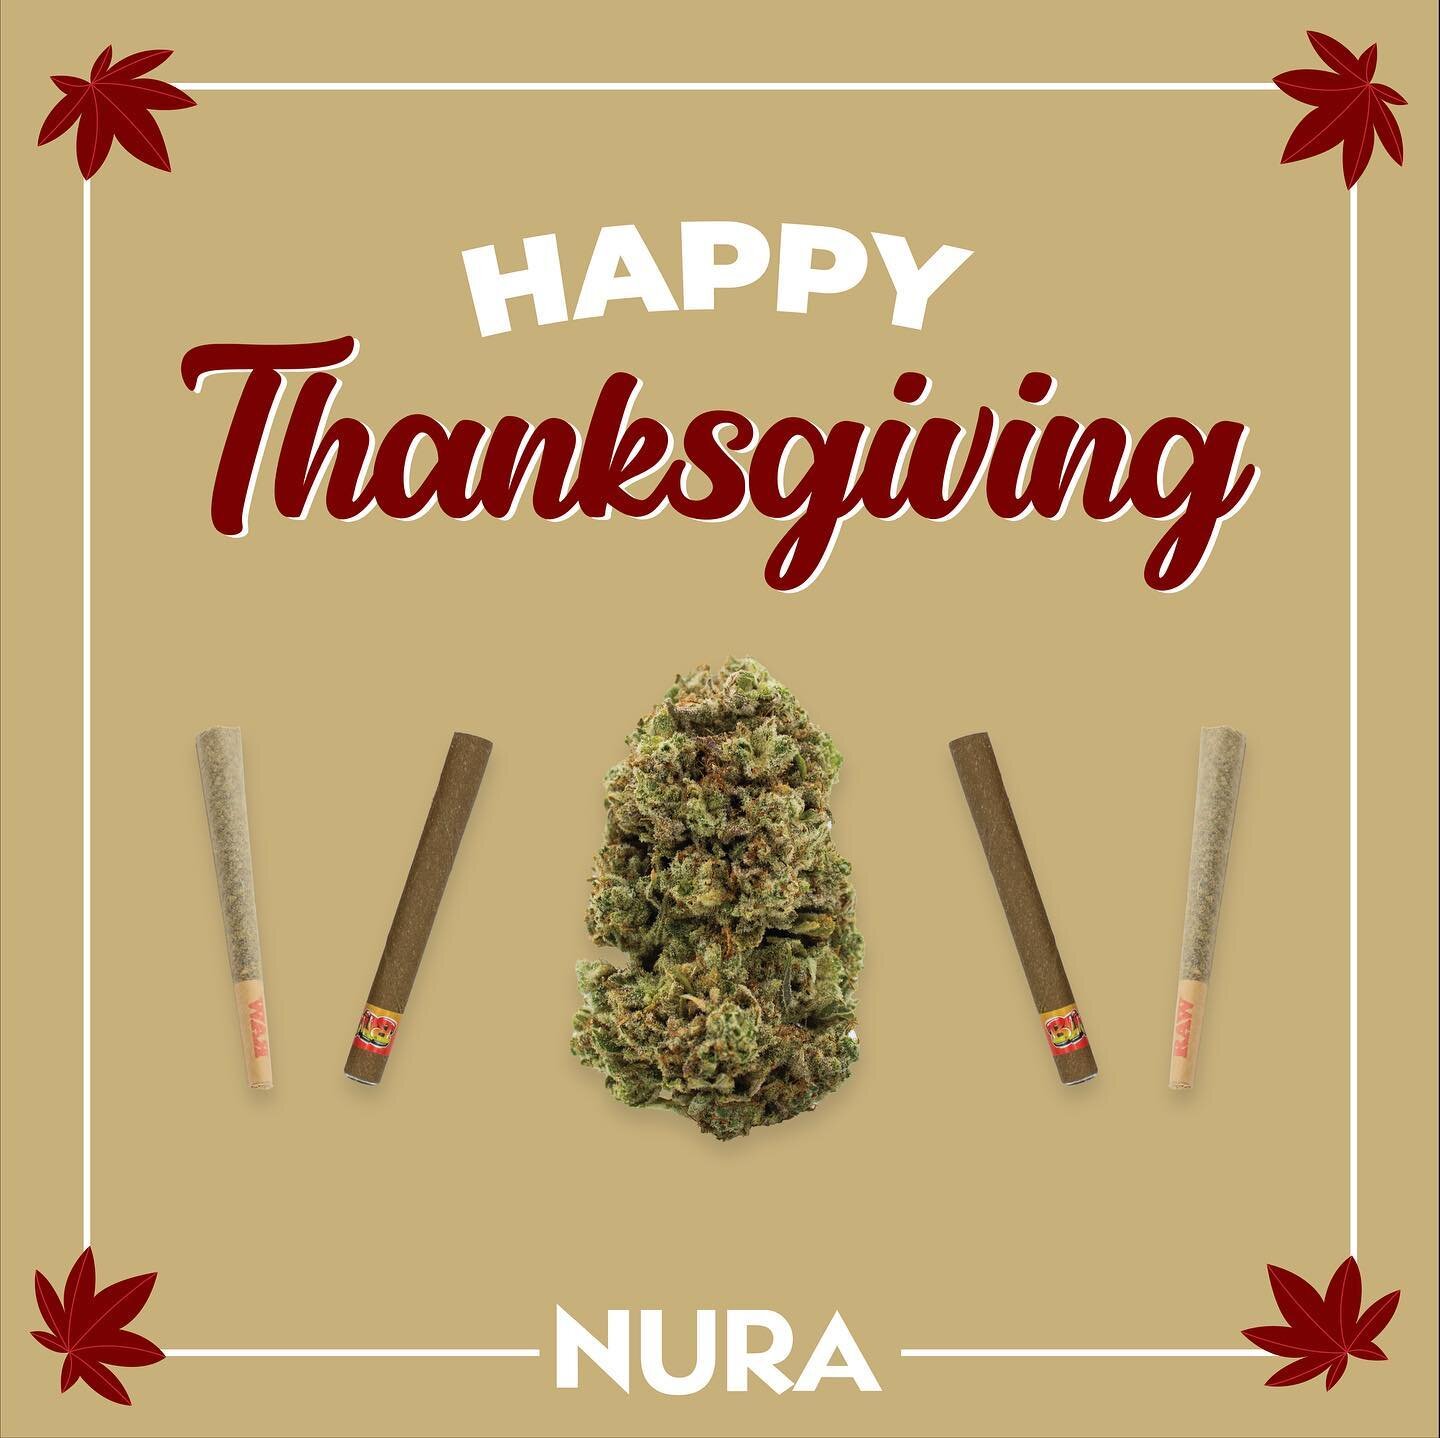 Happy Thanksgiving from the Nura family!

Eat, relax, &amp; enjoy some good buds with friends and family 🦃🥂🔥

What are you thankful for?